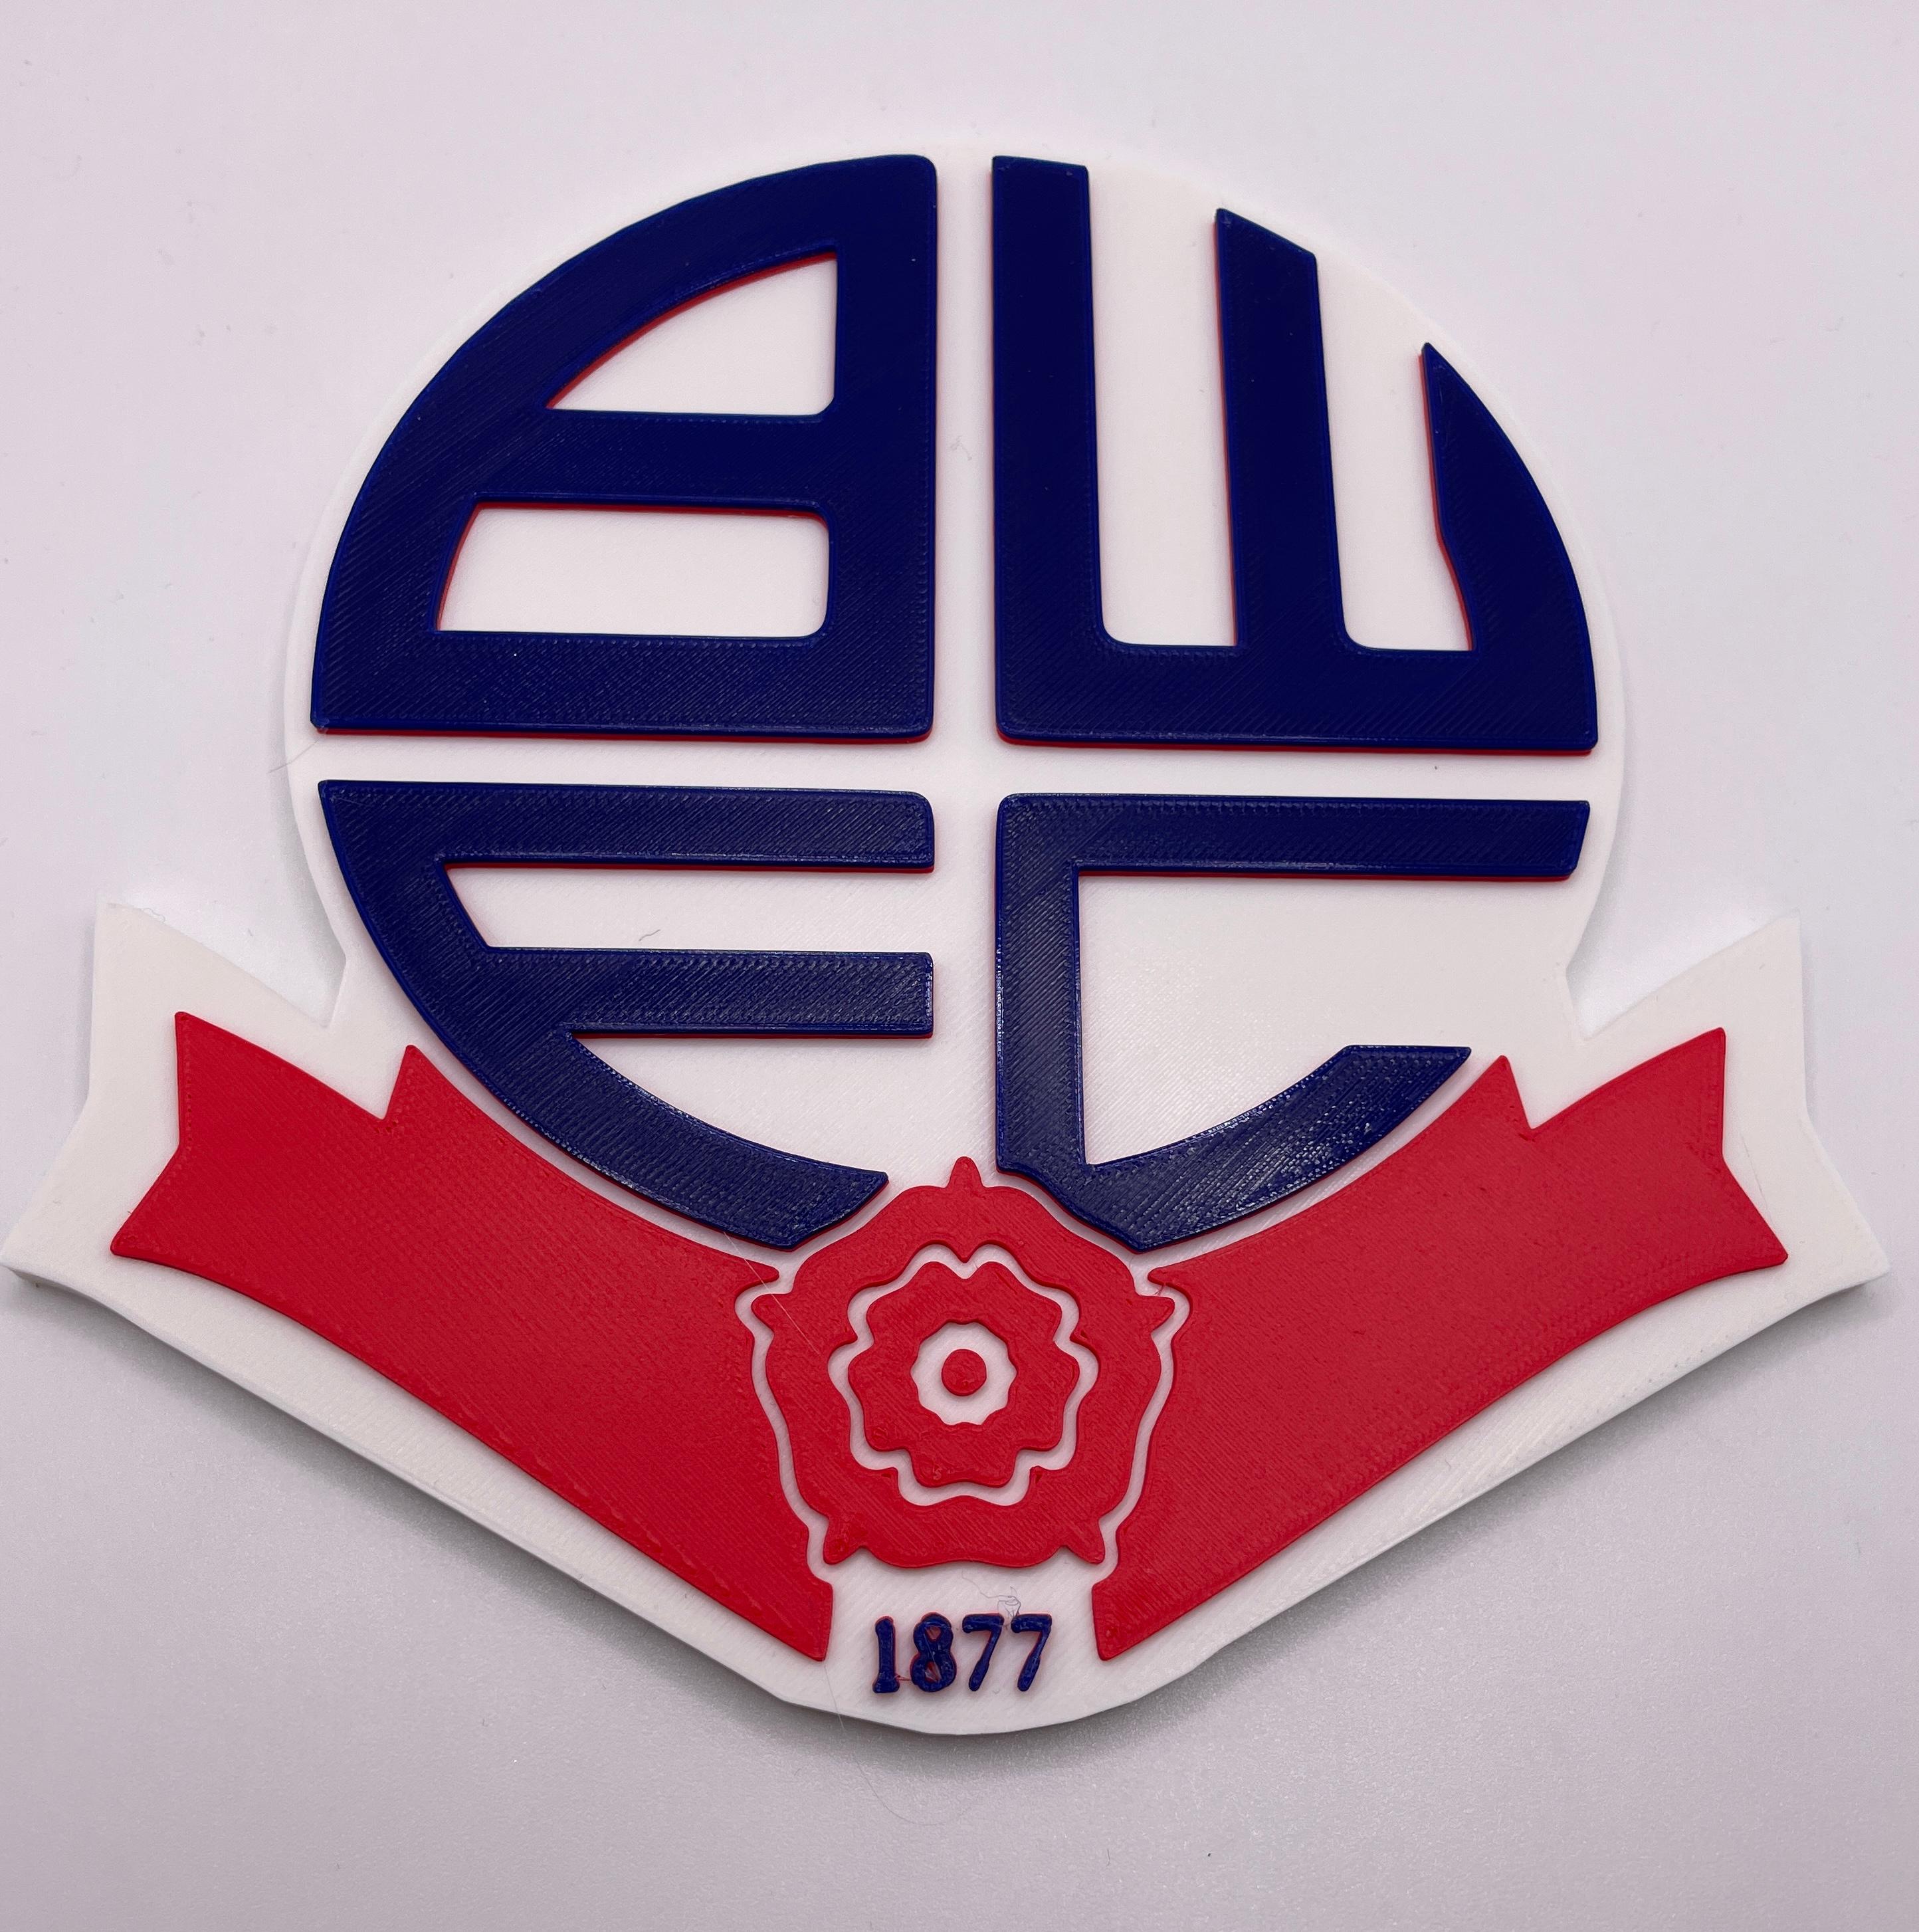 Bolton Wanderers FC coaster or plaque - Perfection! Thank you for making this one on request, DWTC!! - 3d model